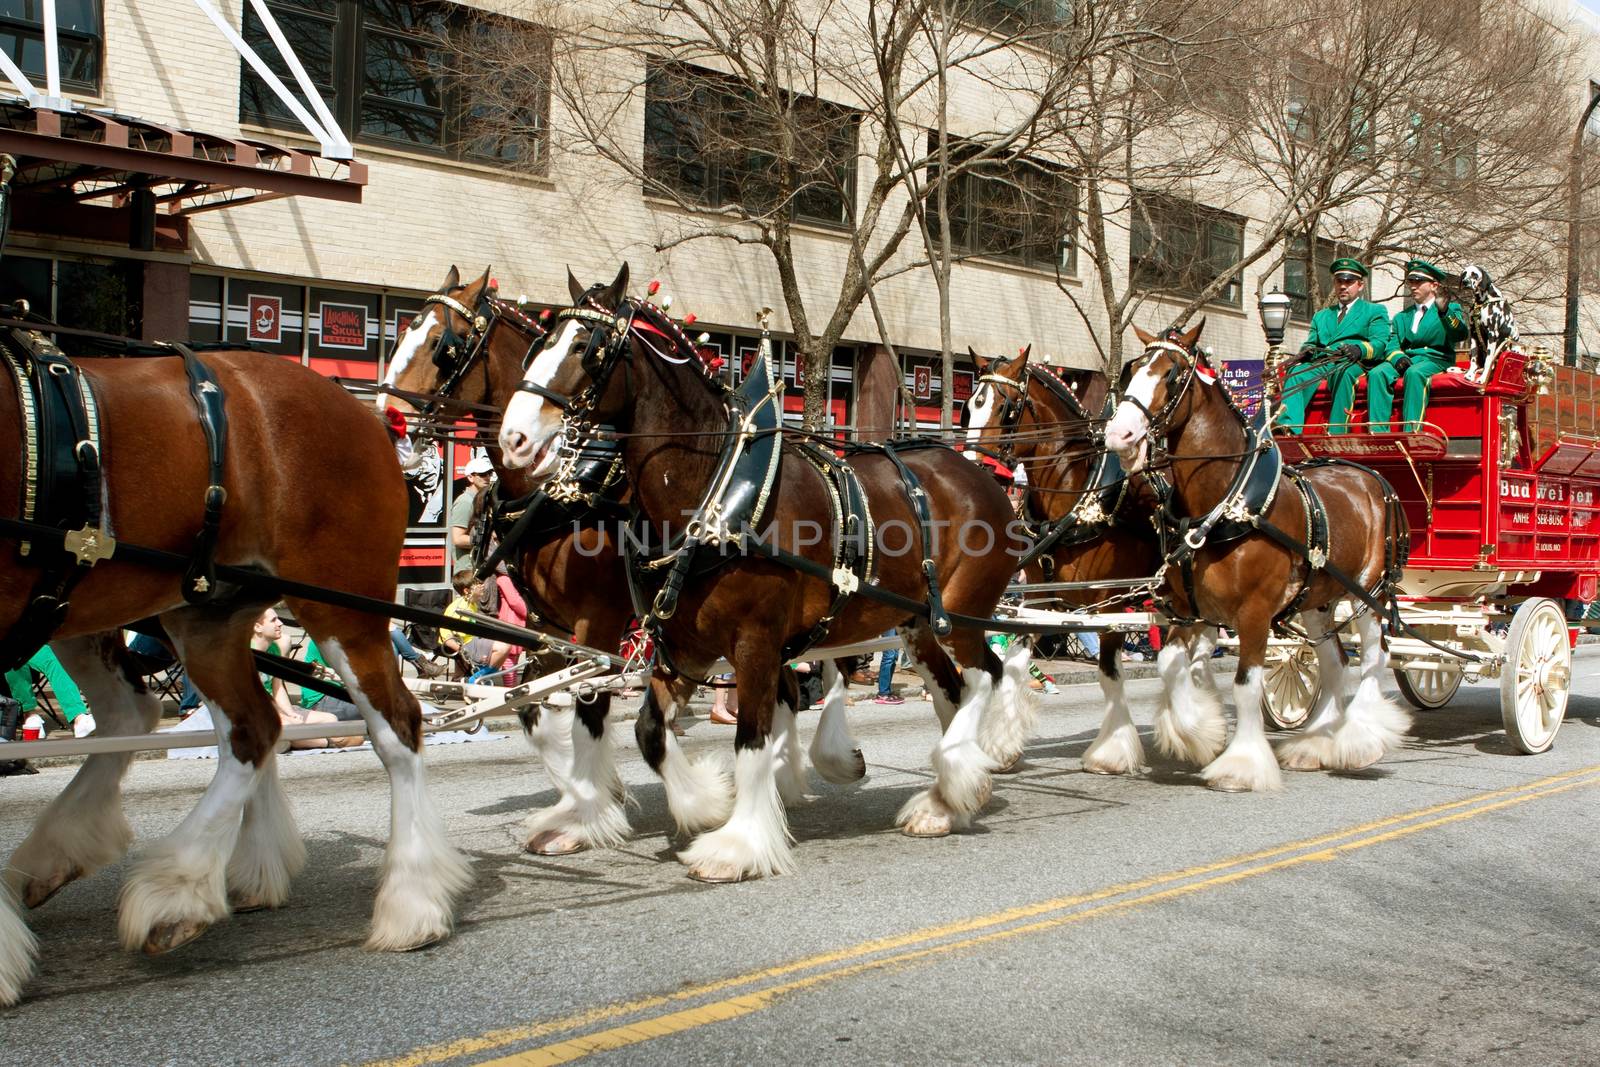 Budweiser Clydesdales Trot In St. Patrick's Parade by BluIz60